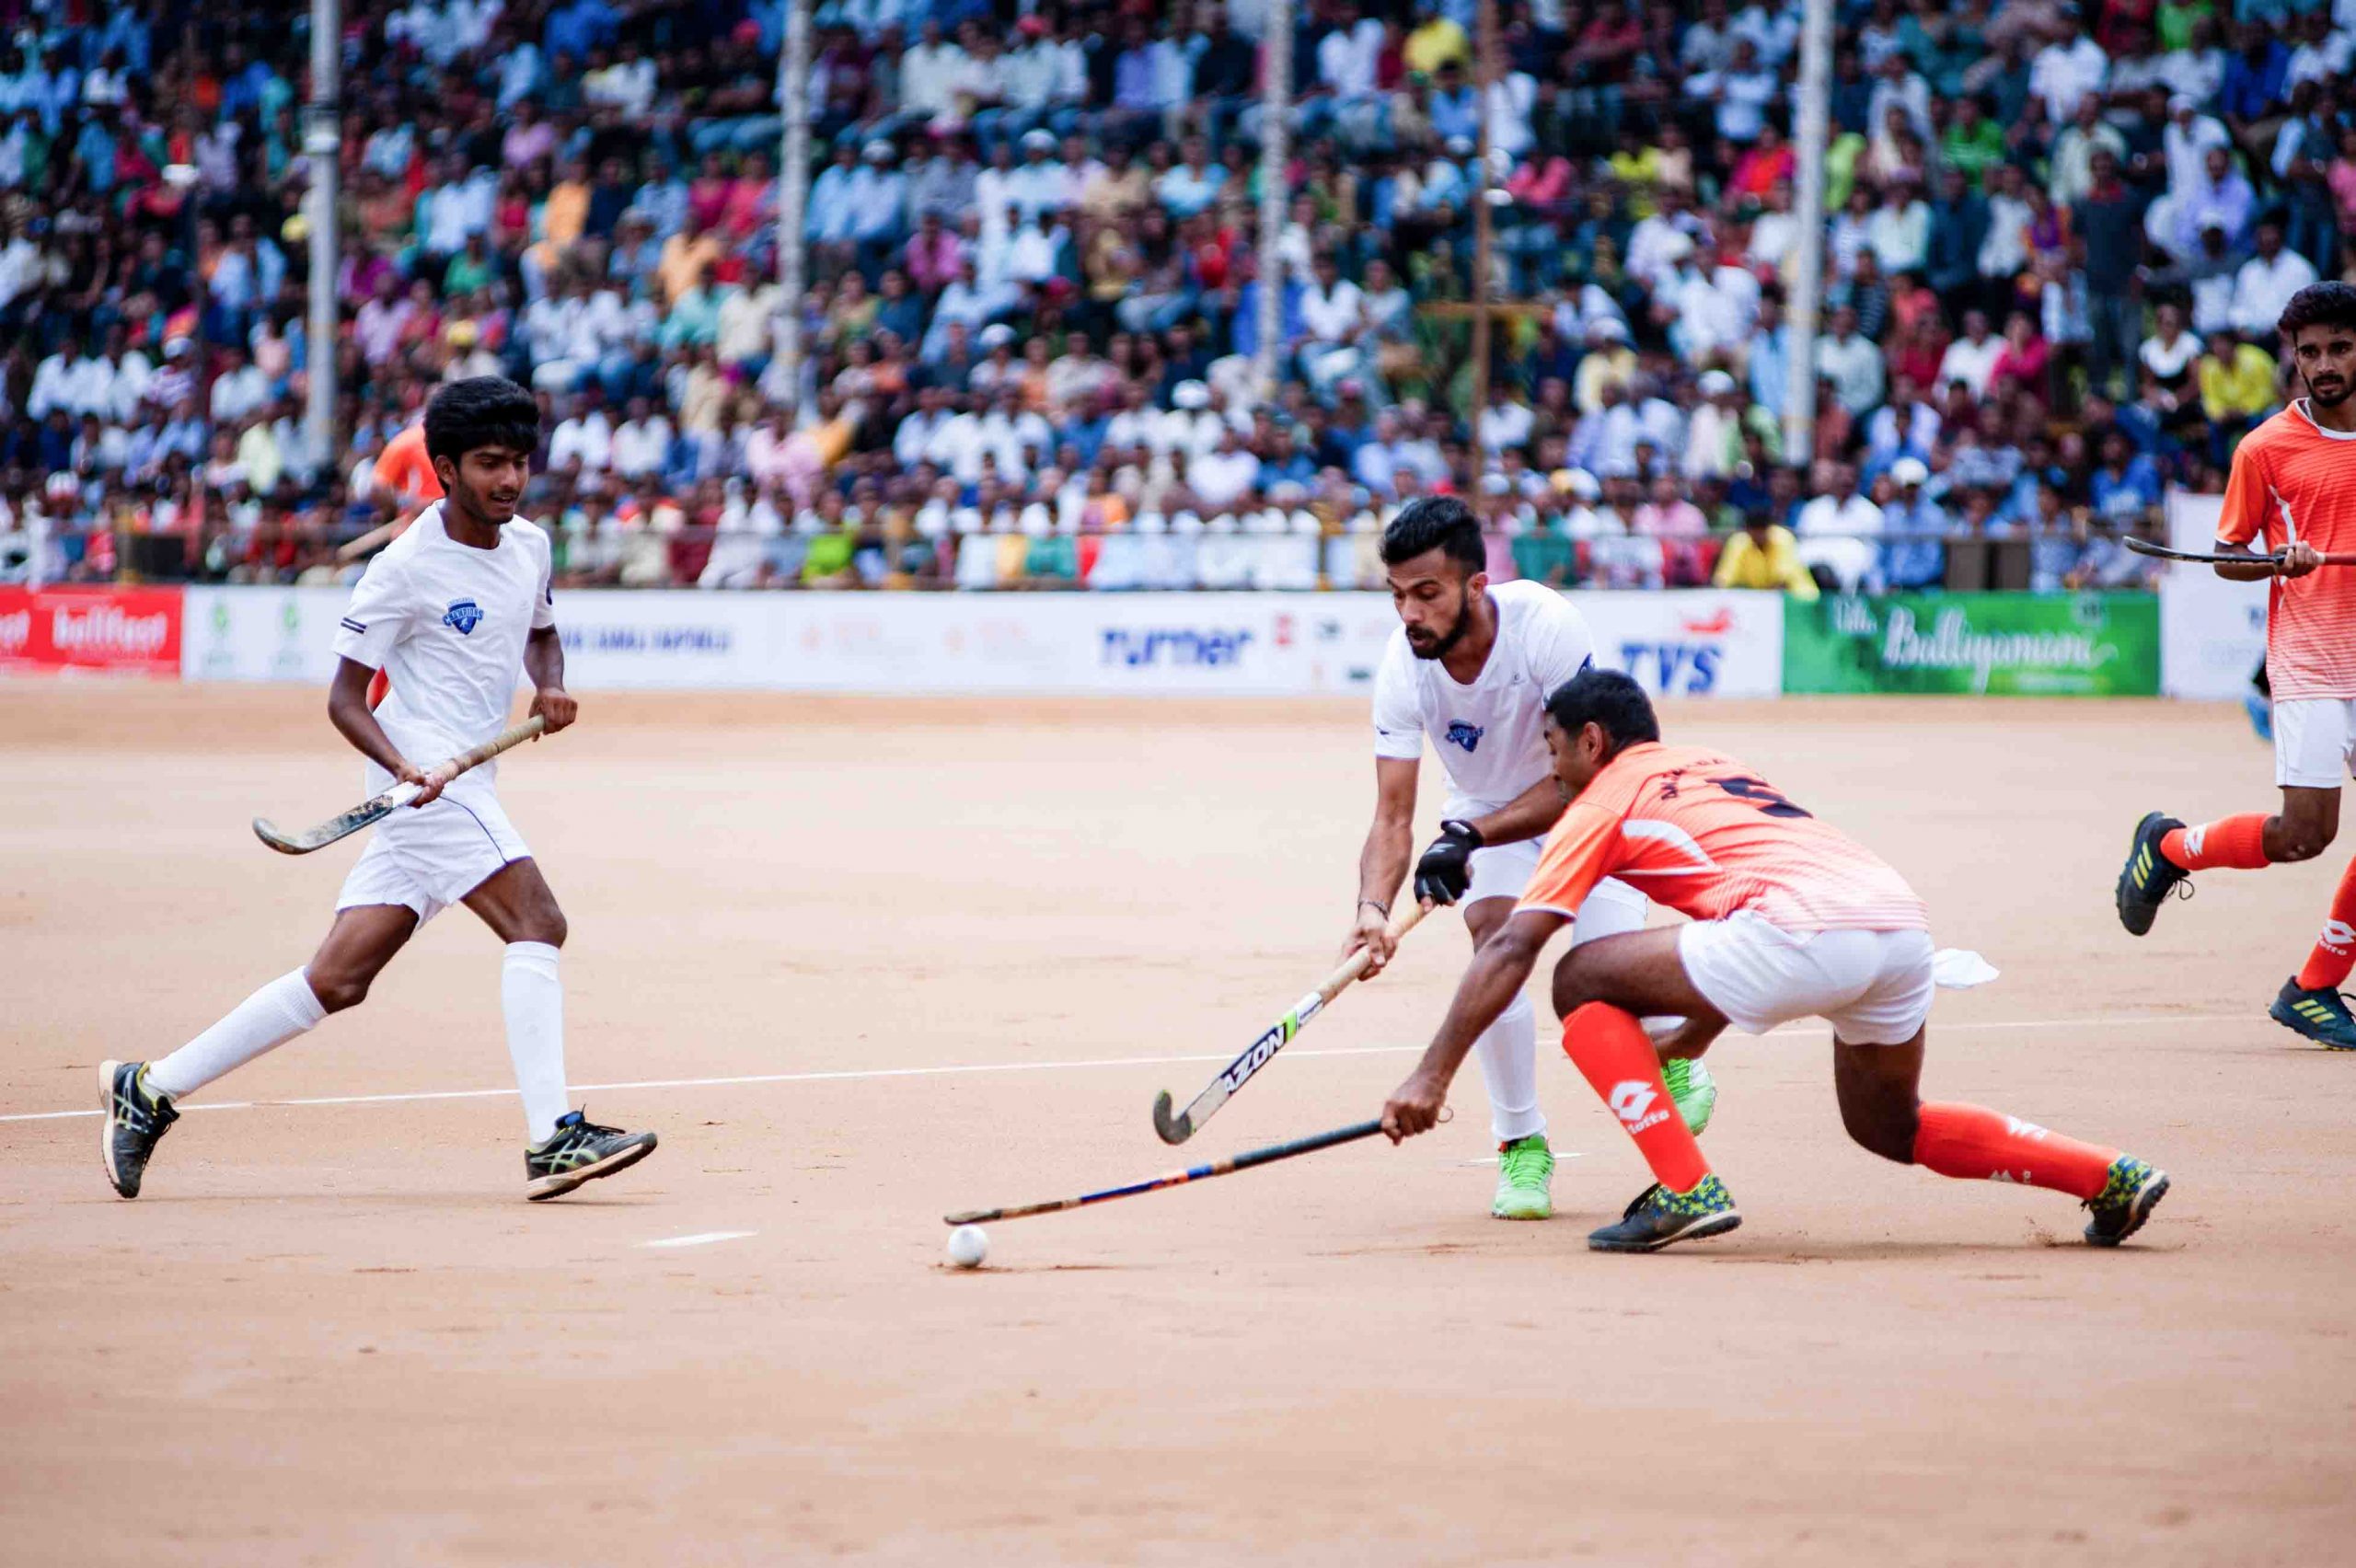 The rich hockey culture ingrained in Kodagu has culminated into producing an arsenal of players who have time and again represented India at global hockey tournaments